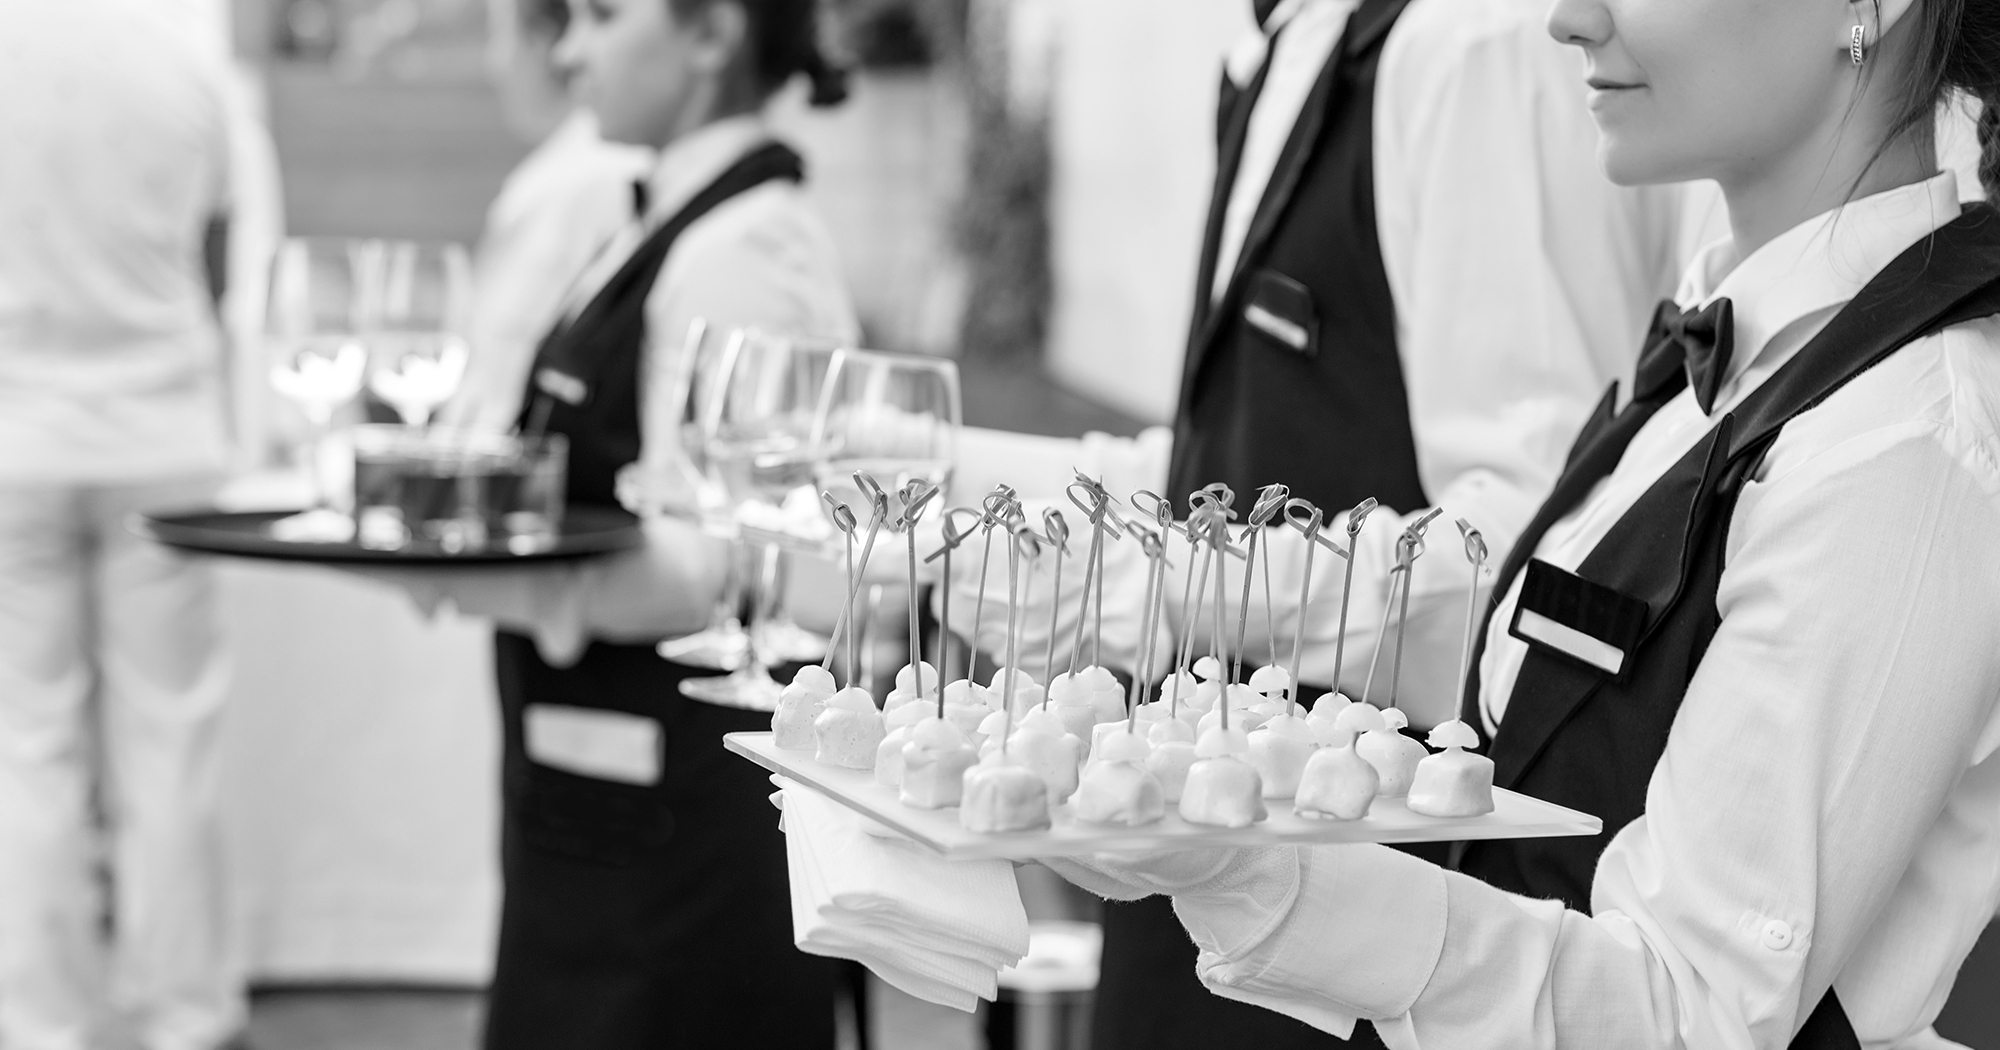 Hospitality catering staff holding trays of appetizers and drinks for guests.